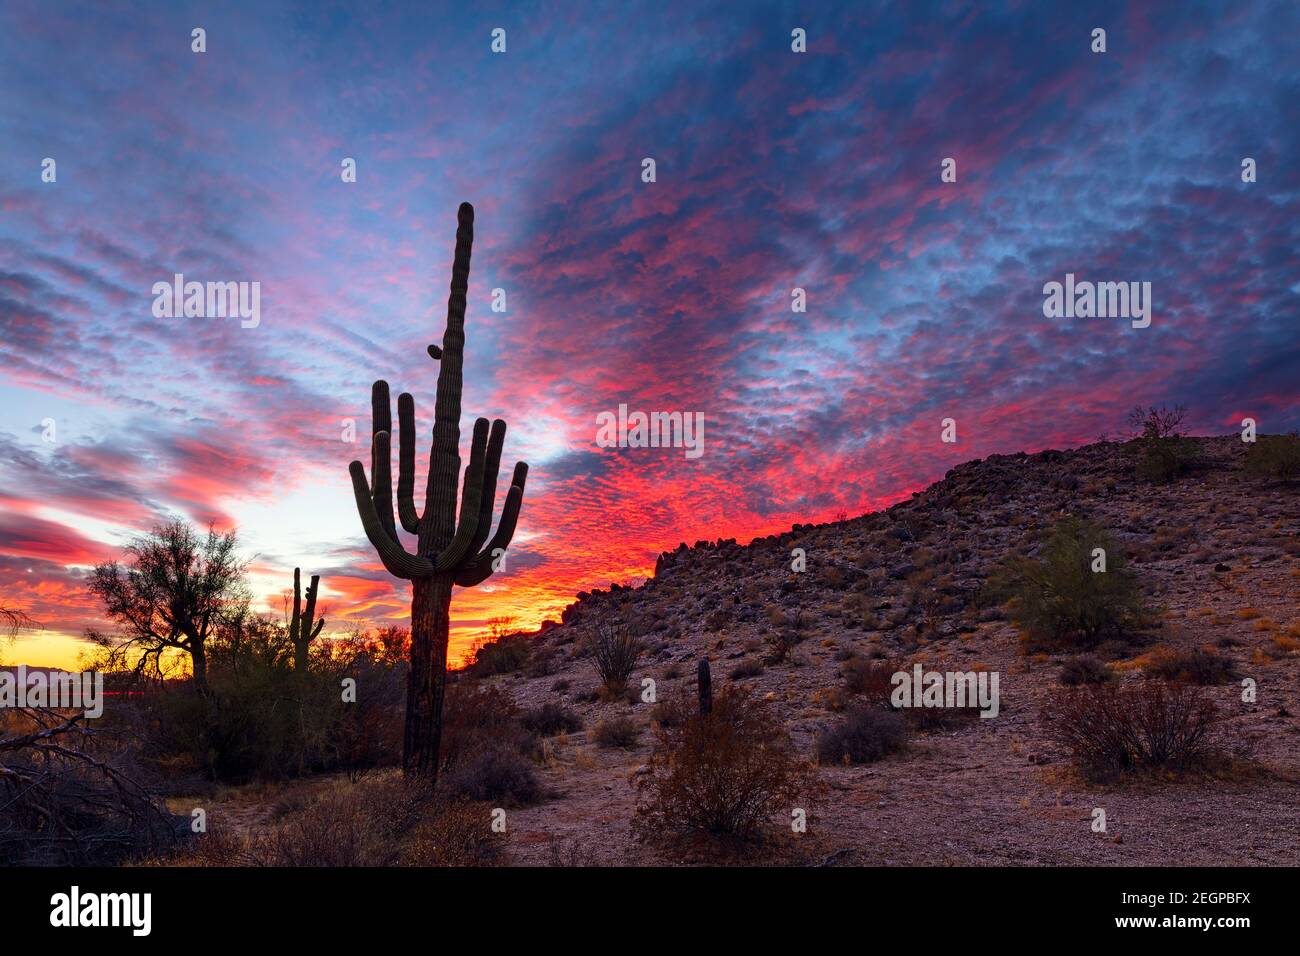 Scenic landscape with Saguaro Cactus and dramatic sunset sky in Sonoran Desert National Monument, Arizona, USA Stock Photo